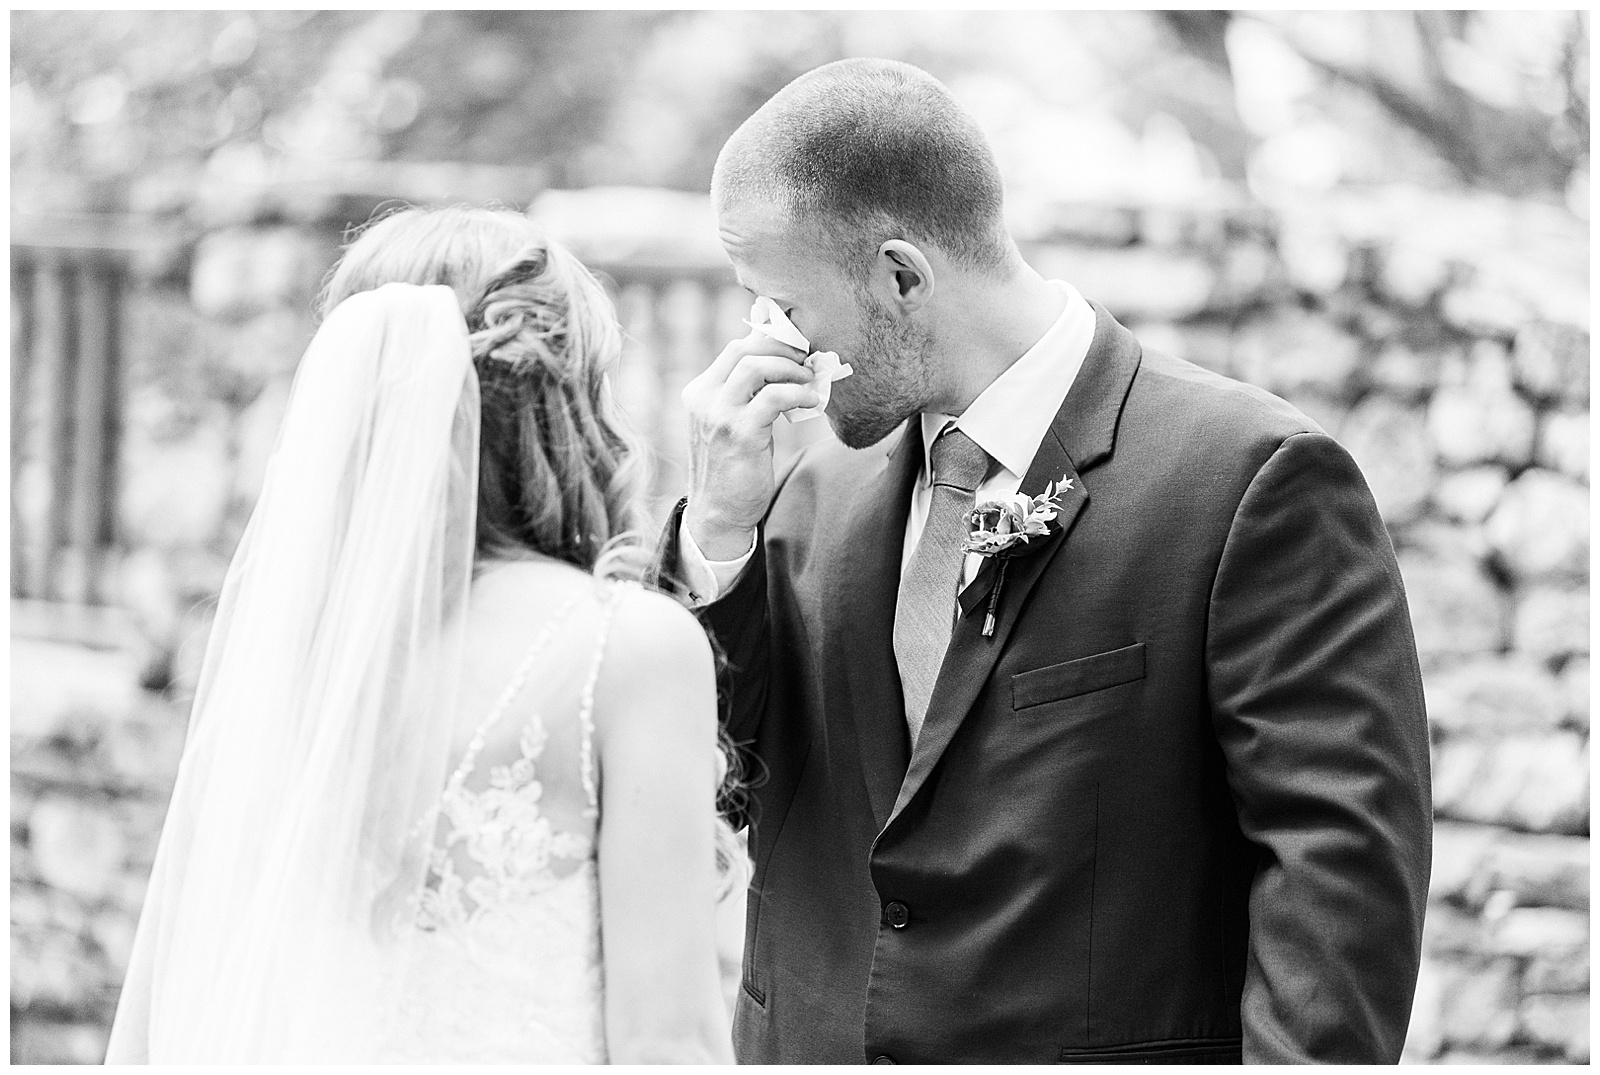 Cute Emotional Bride and Groom First Look from Elegant Modern Red and Navy Blue Themed Wedding in Charlotte, NC | check out the full wedding at KevynDixonPhoto.com